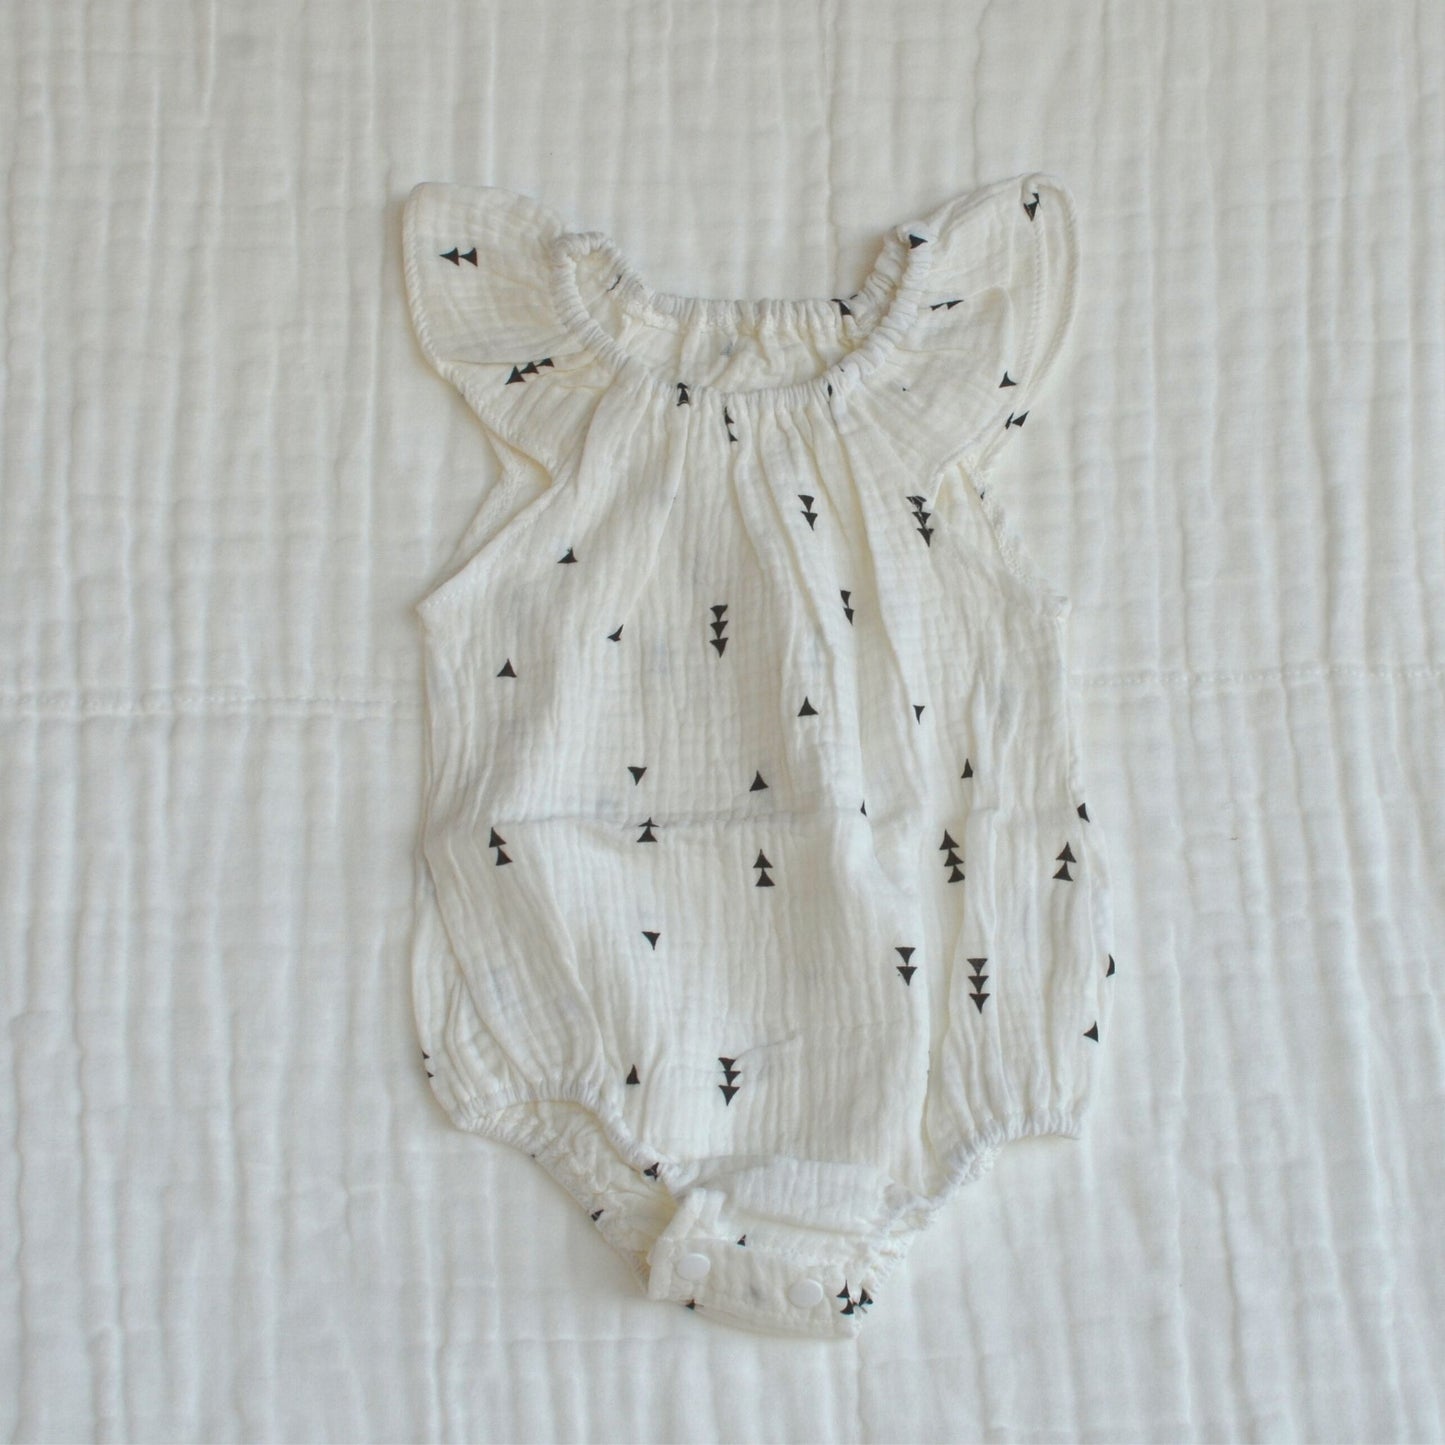 Muslin Ruffled Sleeve Baby Romper 0 to 3 month